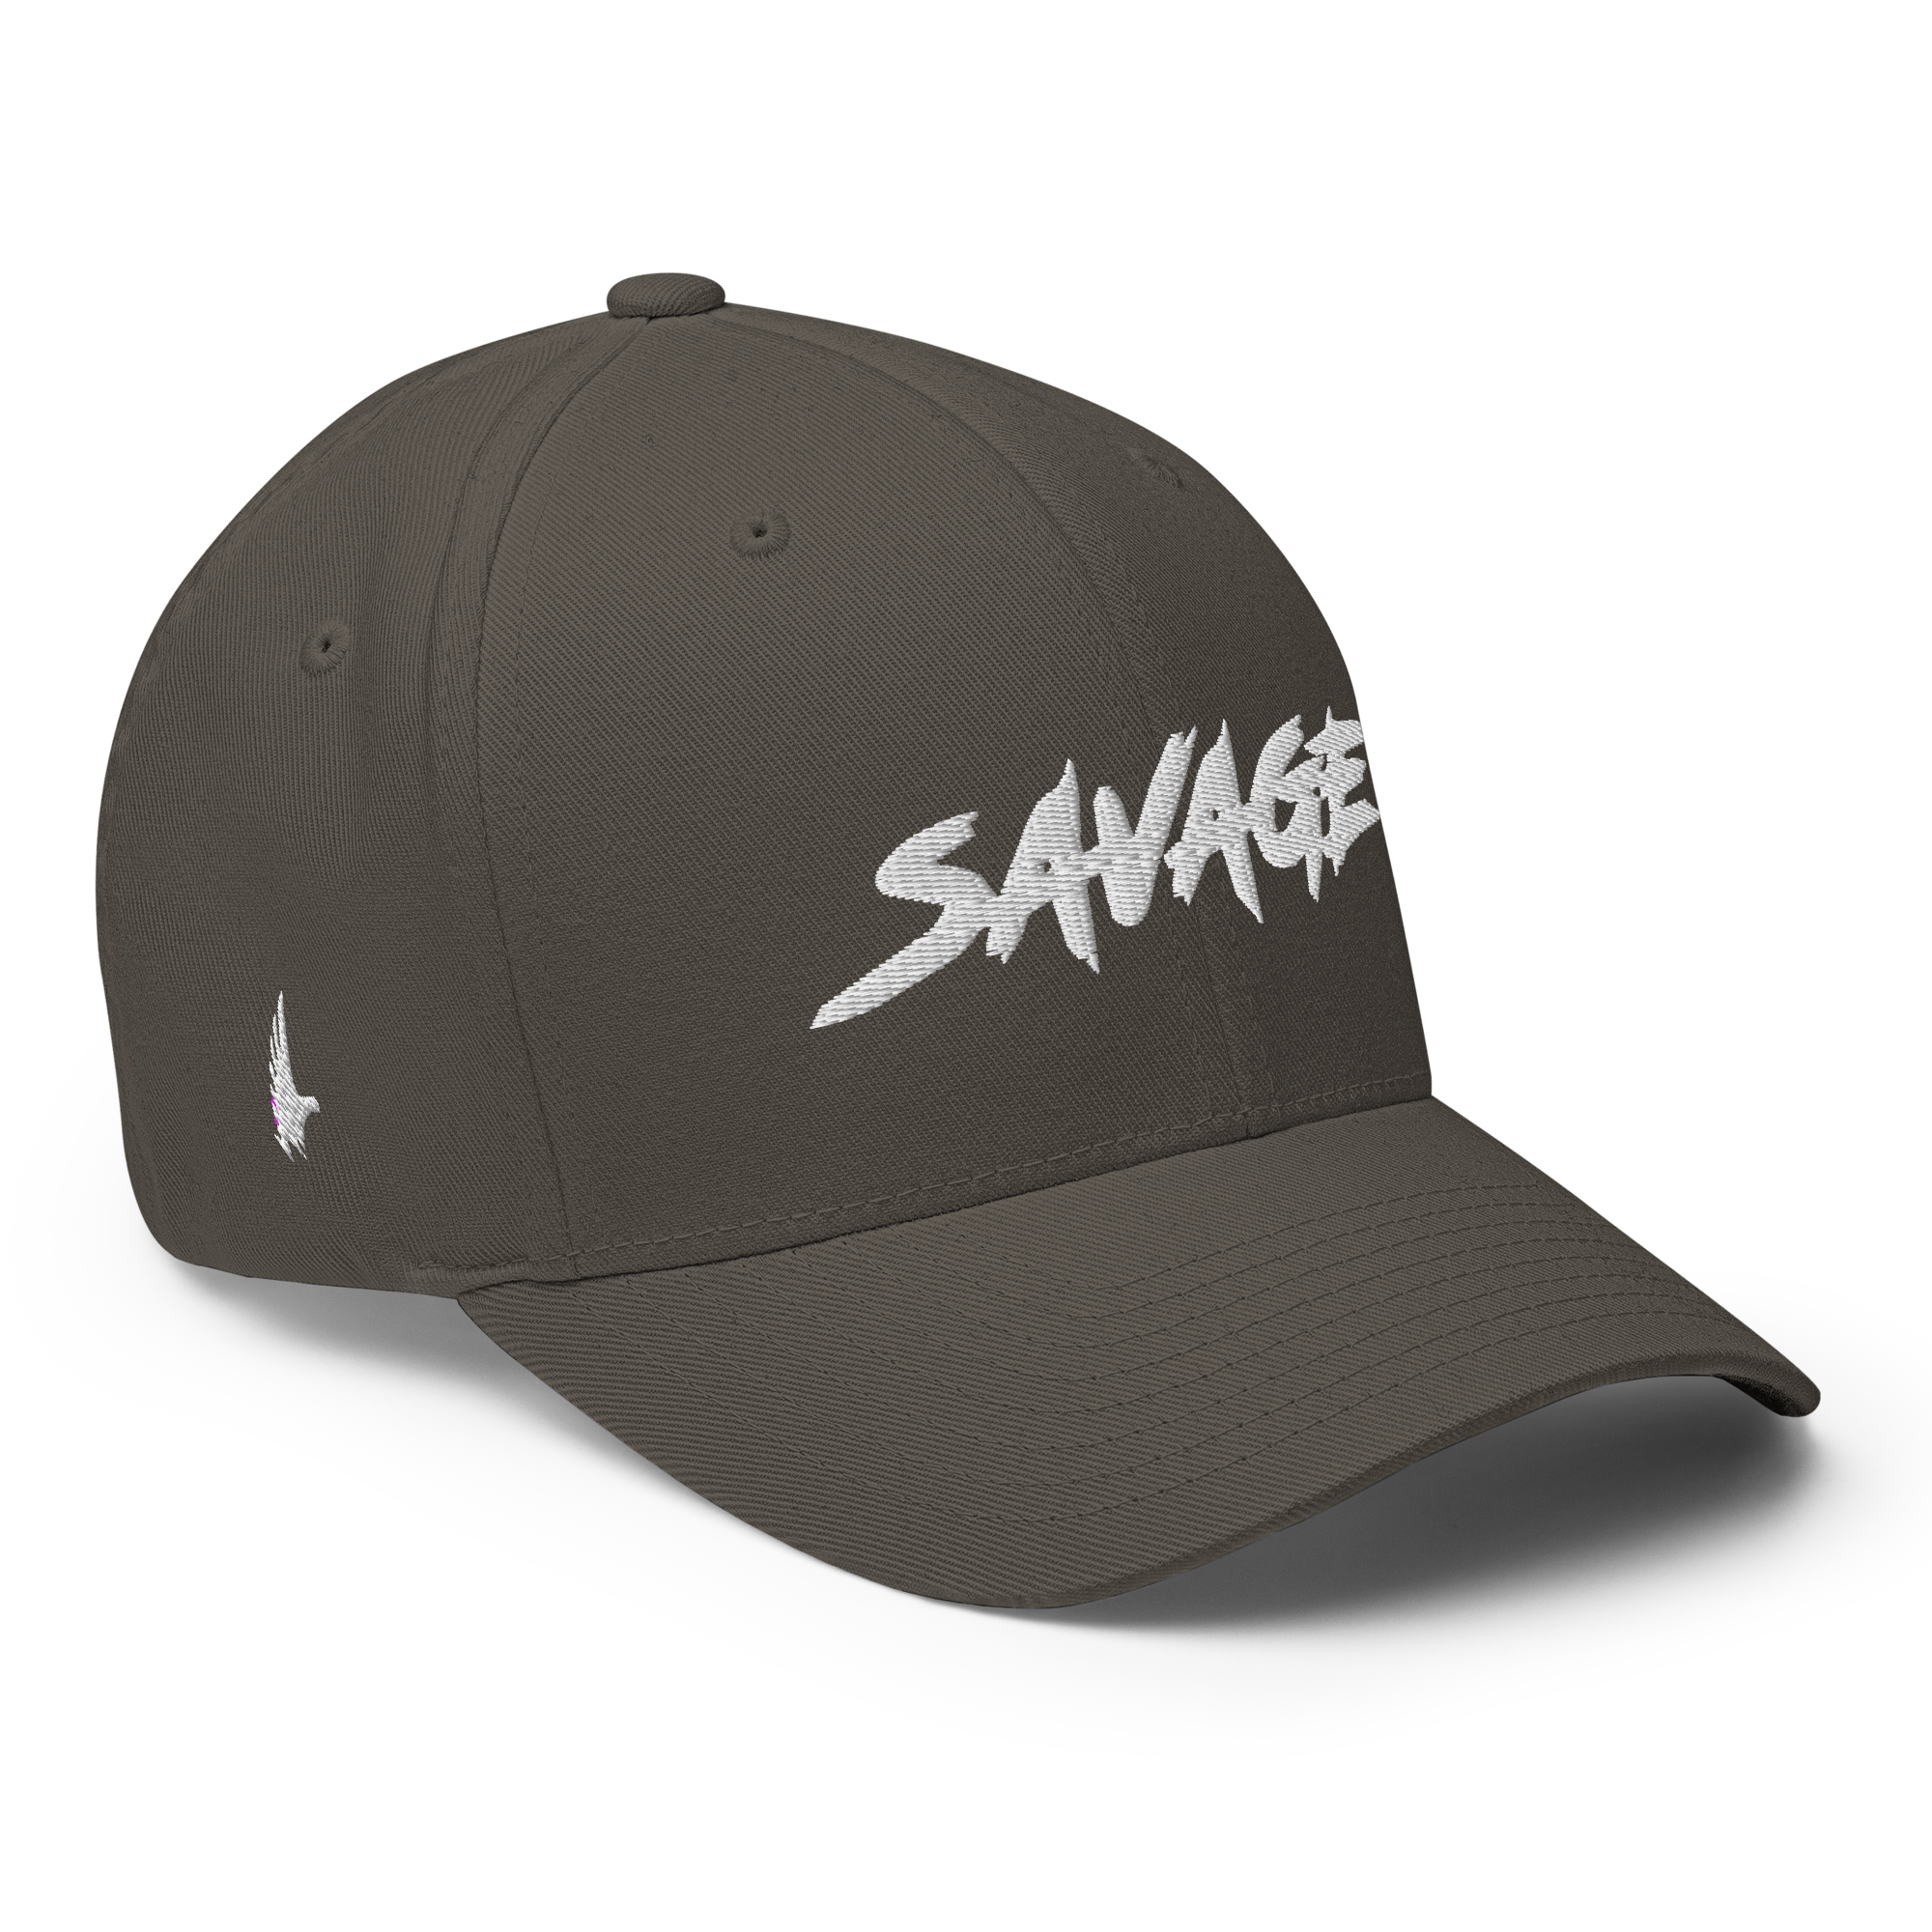 Savage Fitted Hat Charcoal Grey - Loyalty Vibes